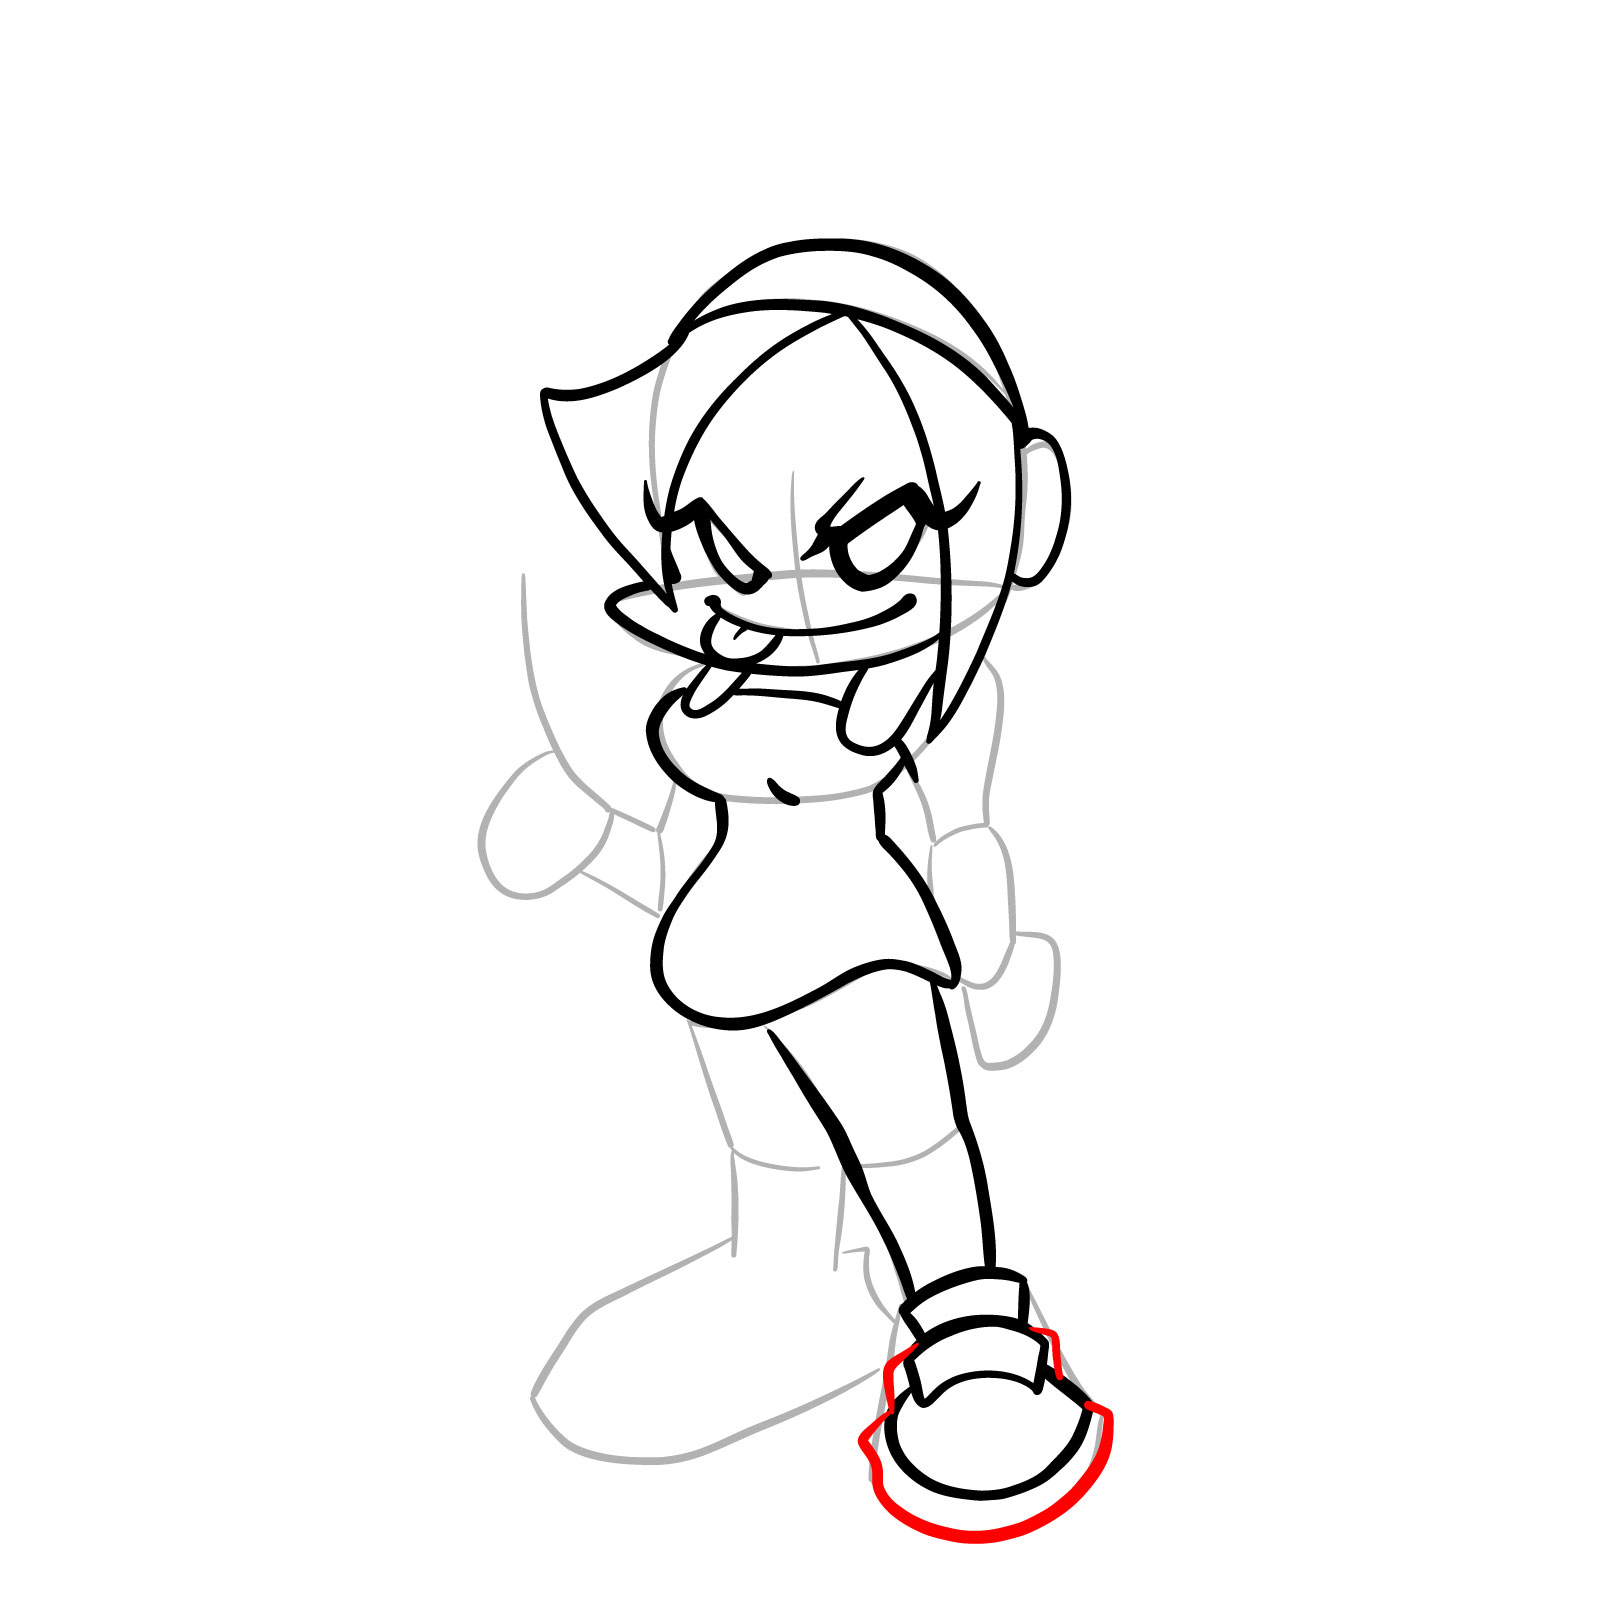 How to draw Nene from FNF - step 17